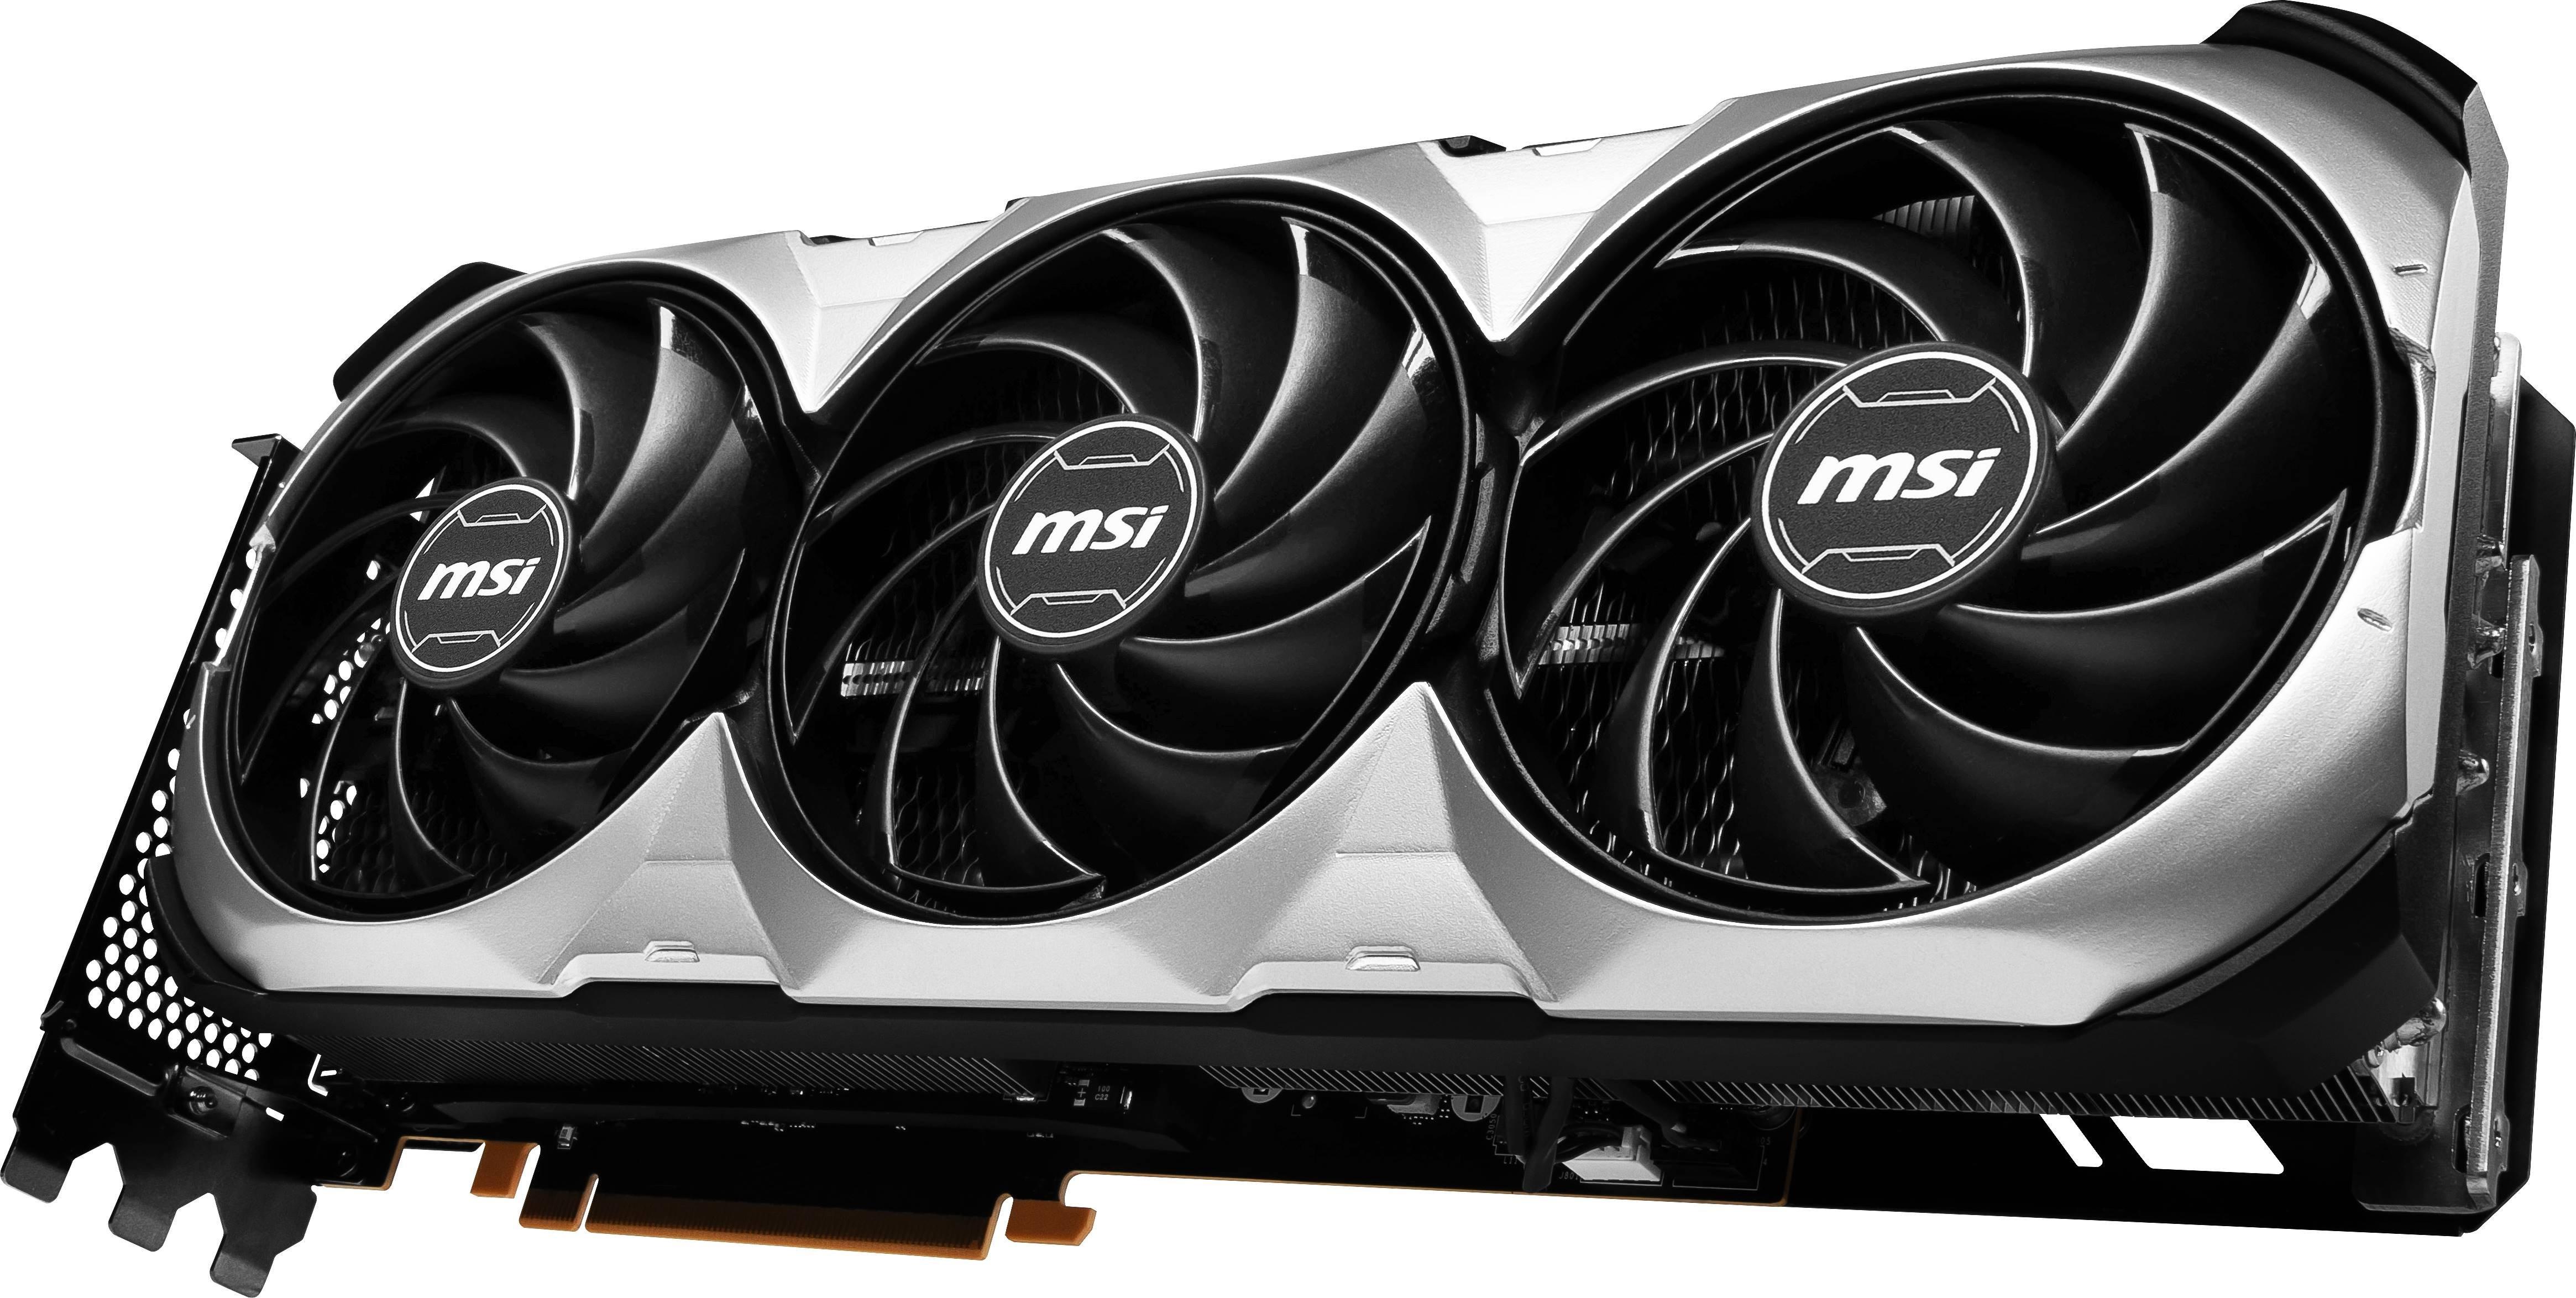 MSI NVIDIA GeForce RTX 4080 Graphic Card - 16 GB GDDR6X - G408016SX -  Graphic Cards 